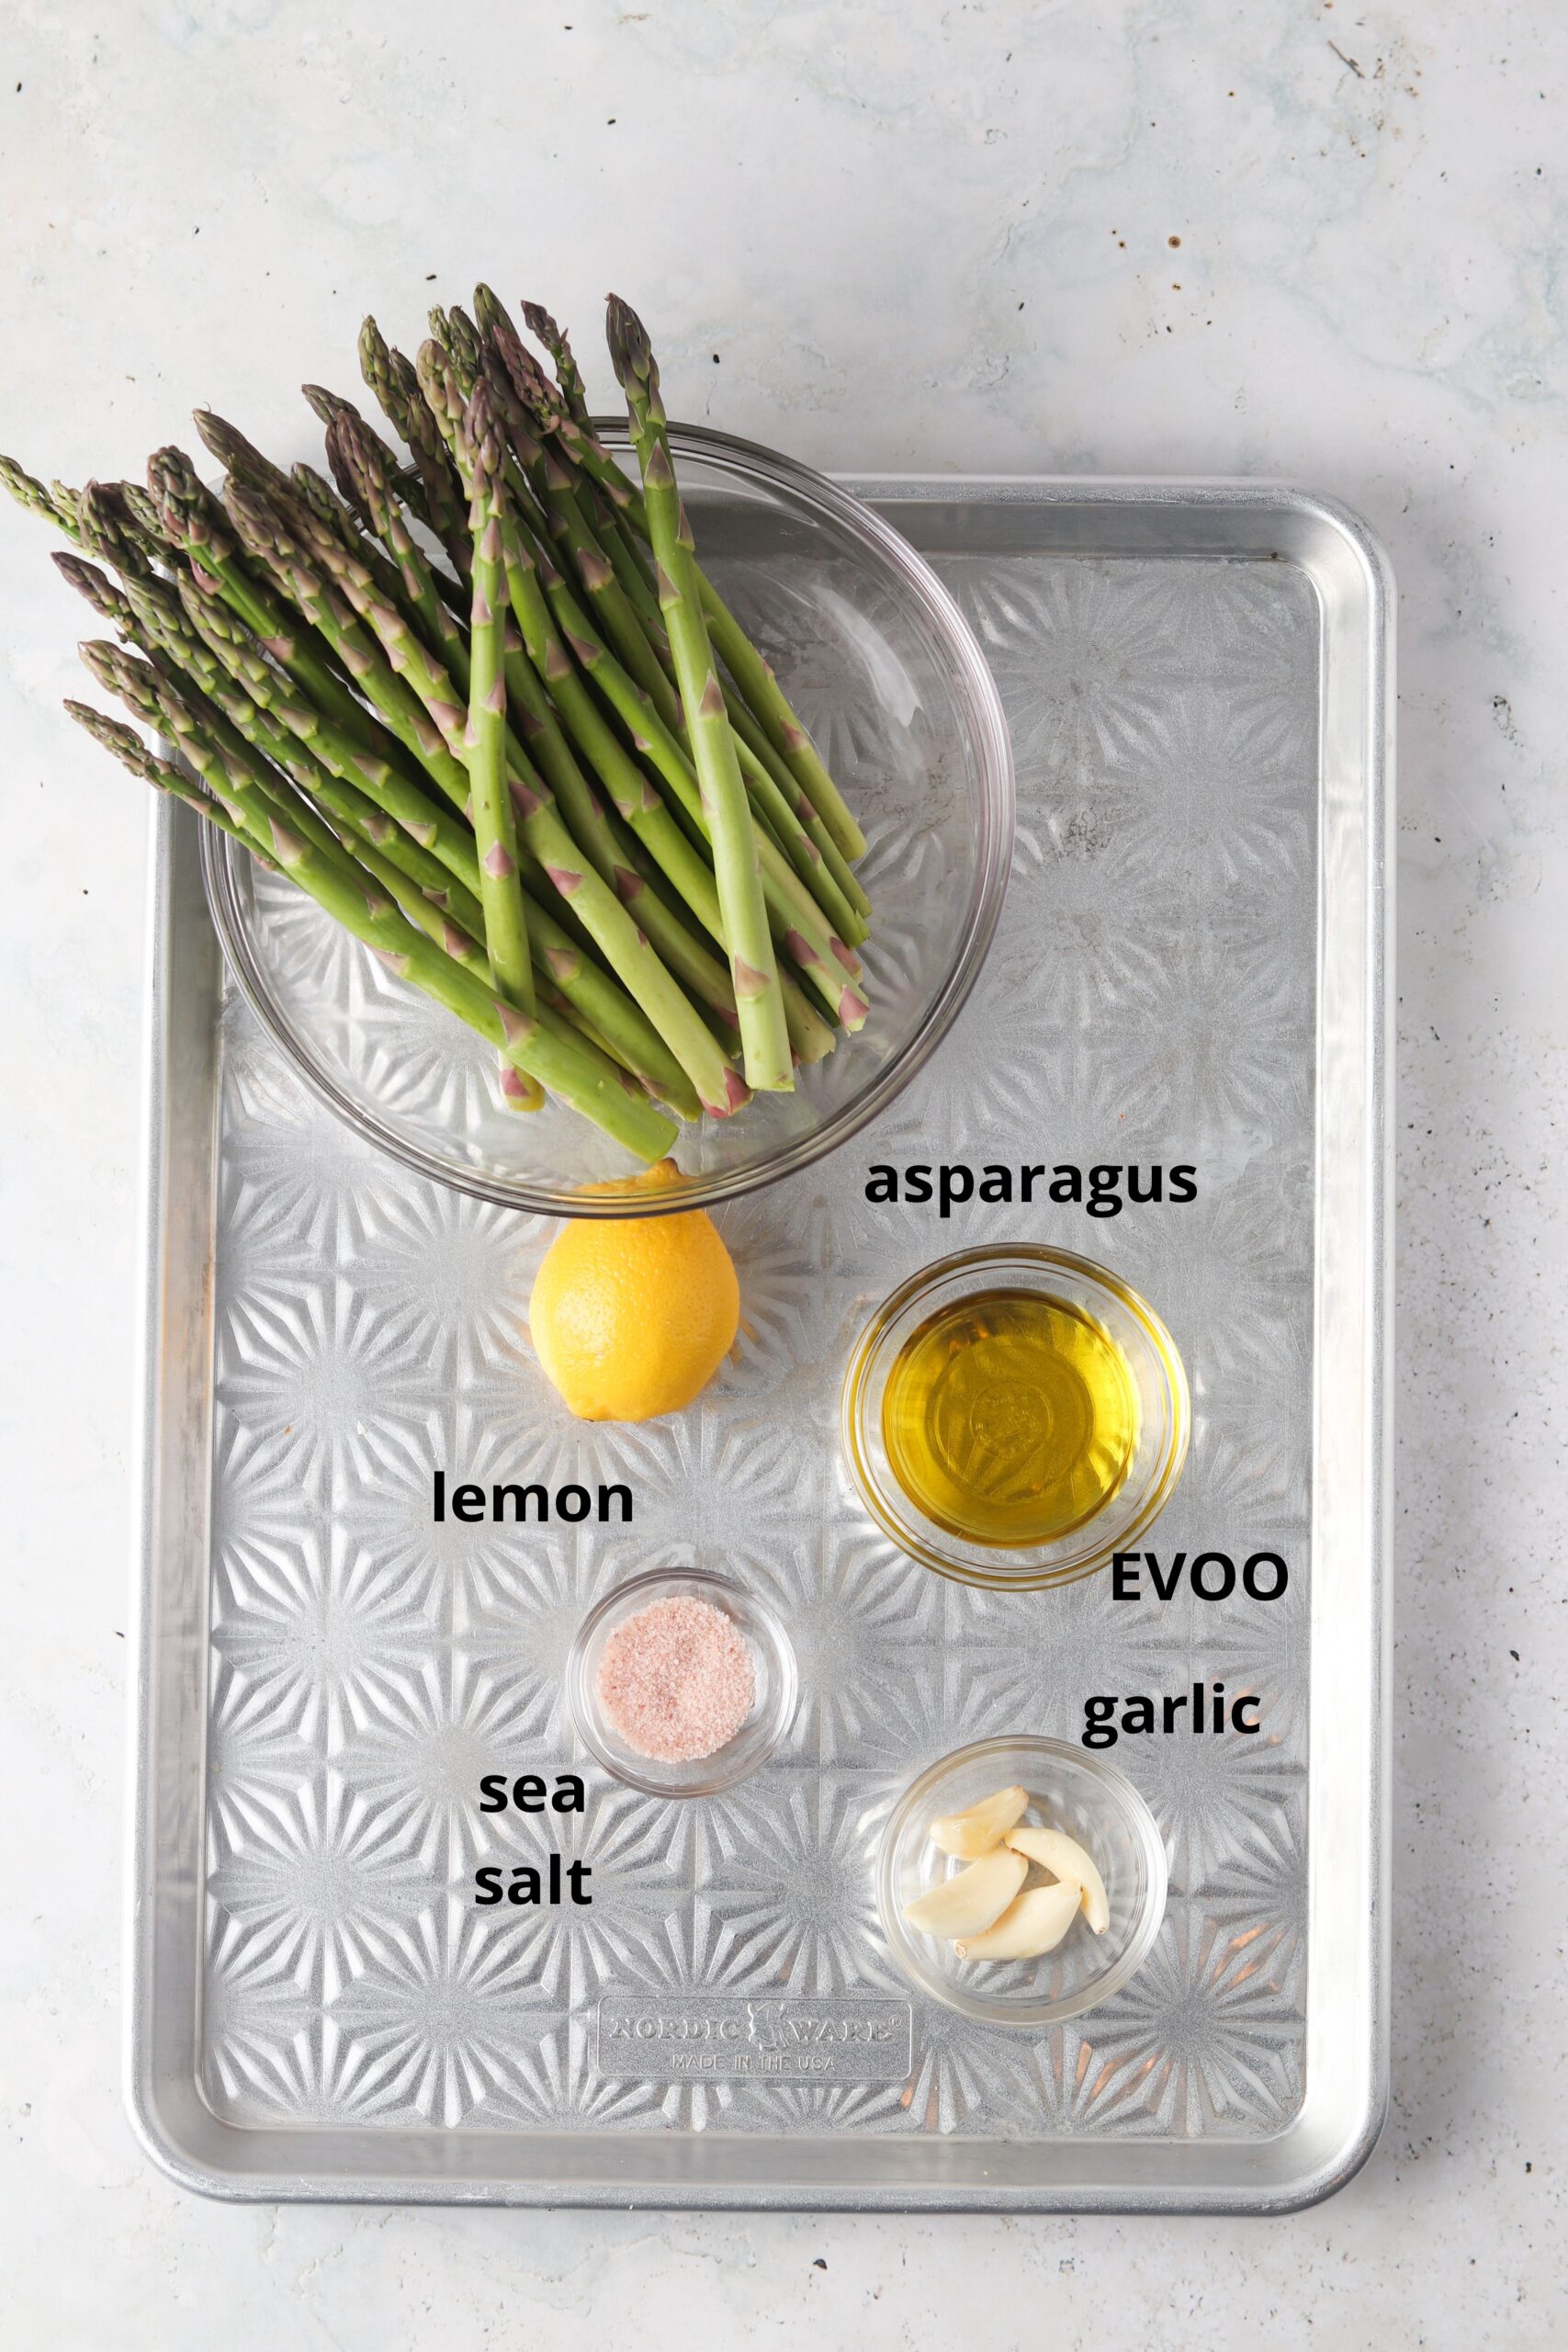 Asparagus ingredients in glass bowls on a metal tray.